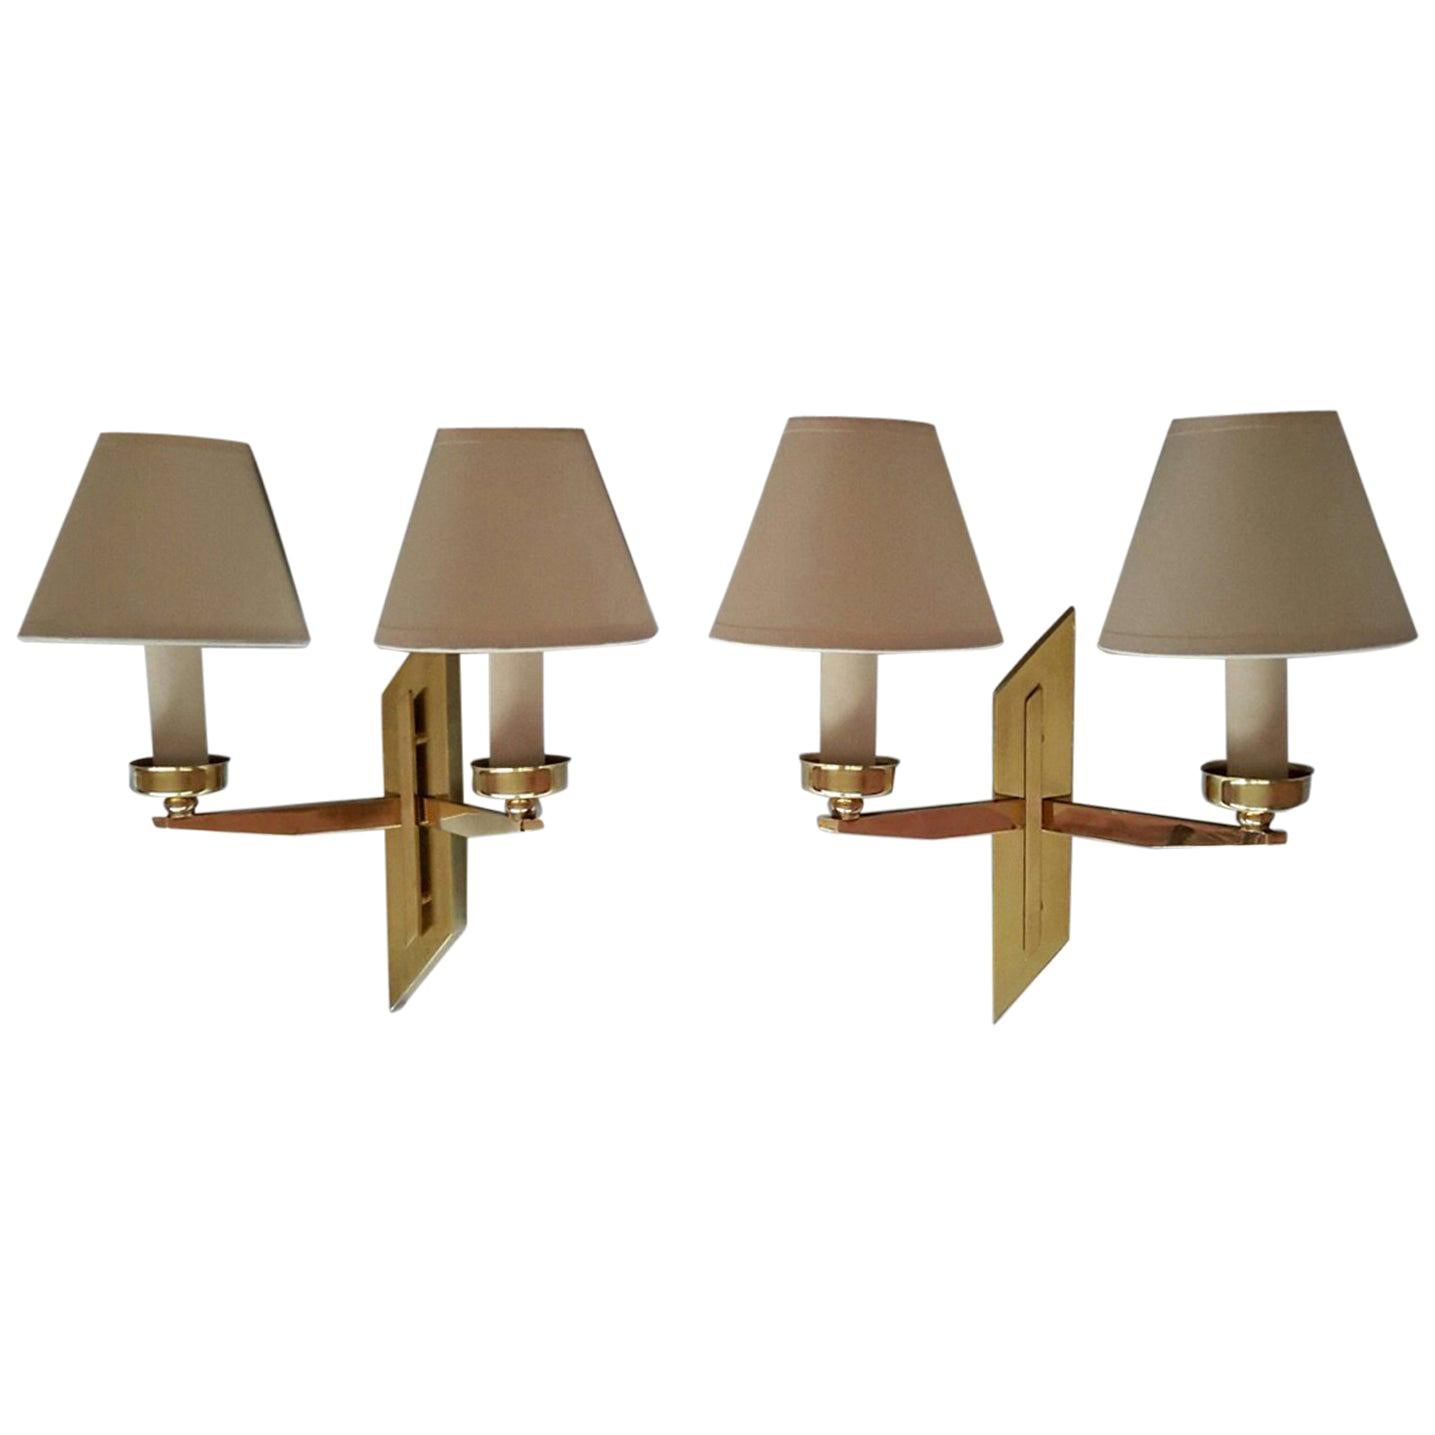 Pair of French Mid-Century Modern Sconces by Maison Lunel, 1950 For Sale